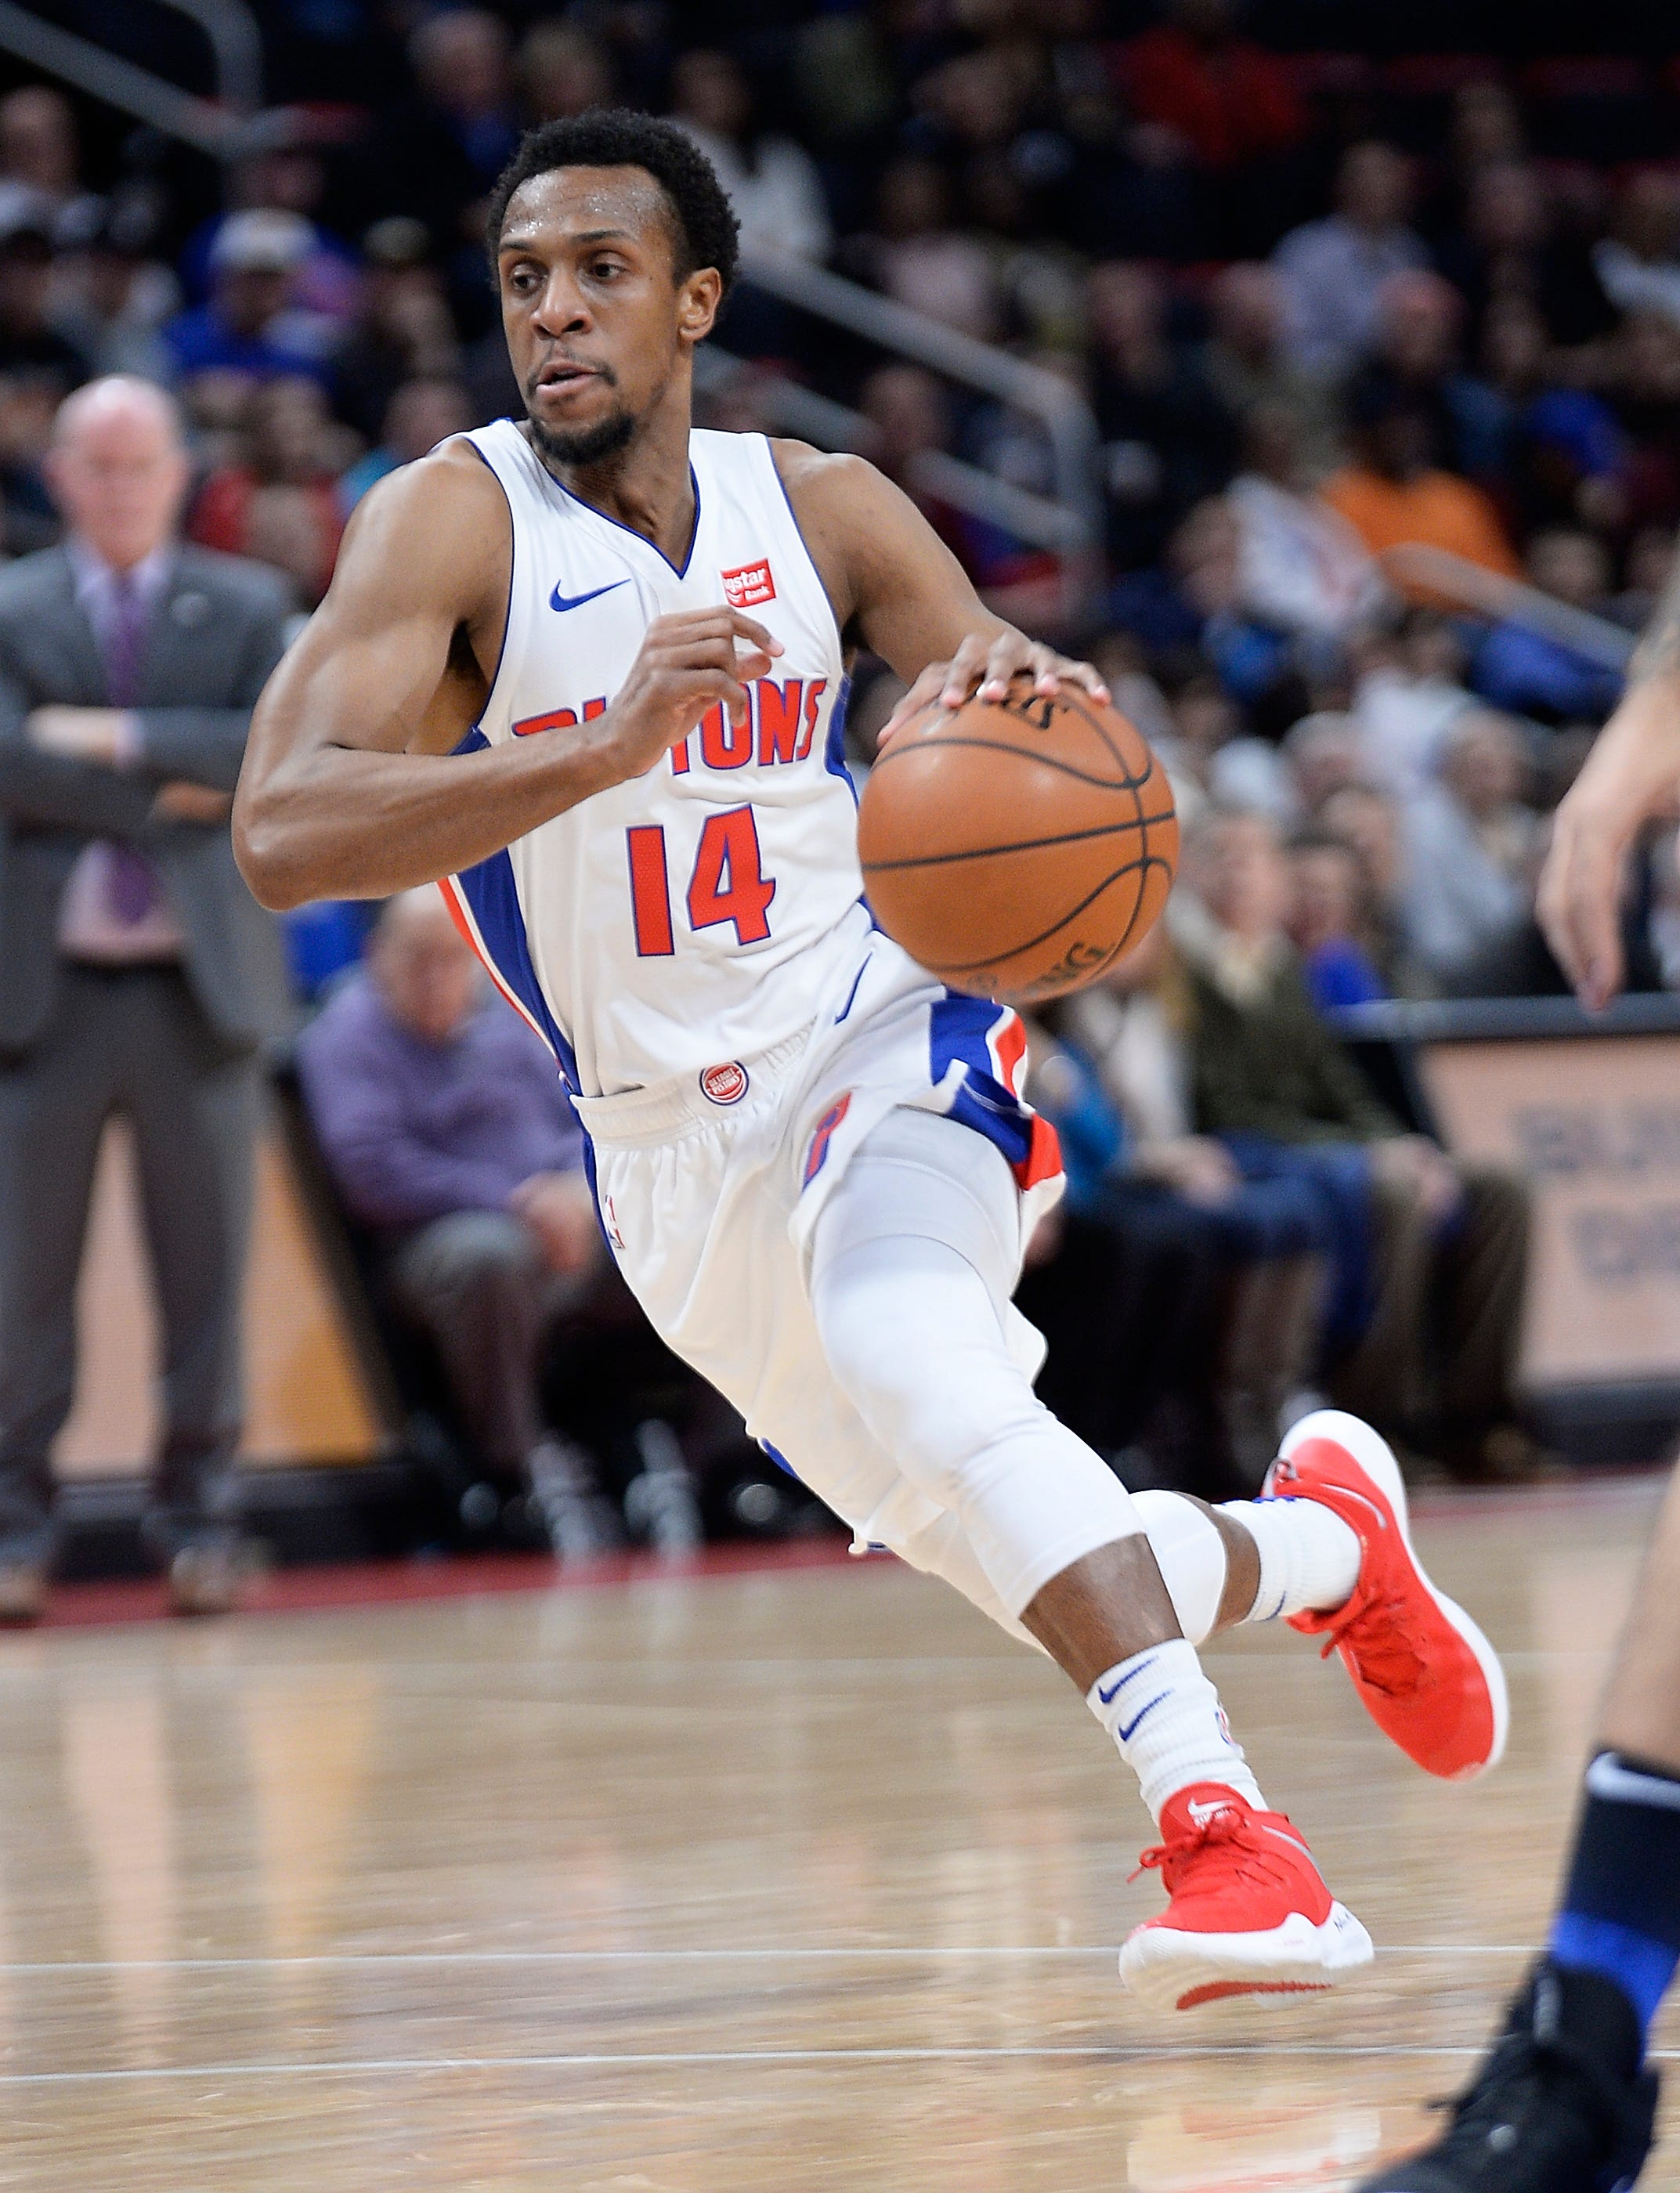 The Pistons are 26-14 this season when Ish Smith is playing.